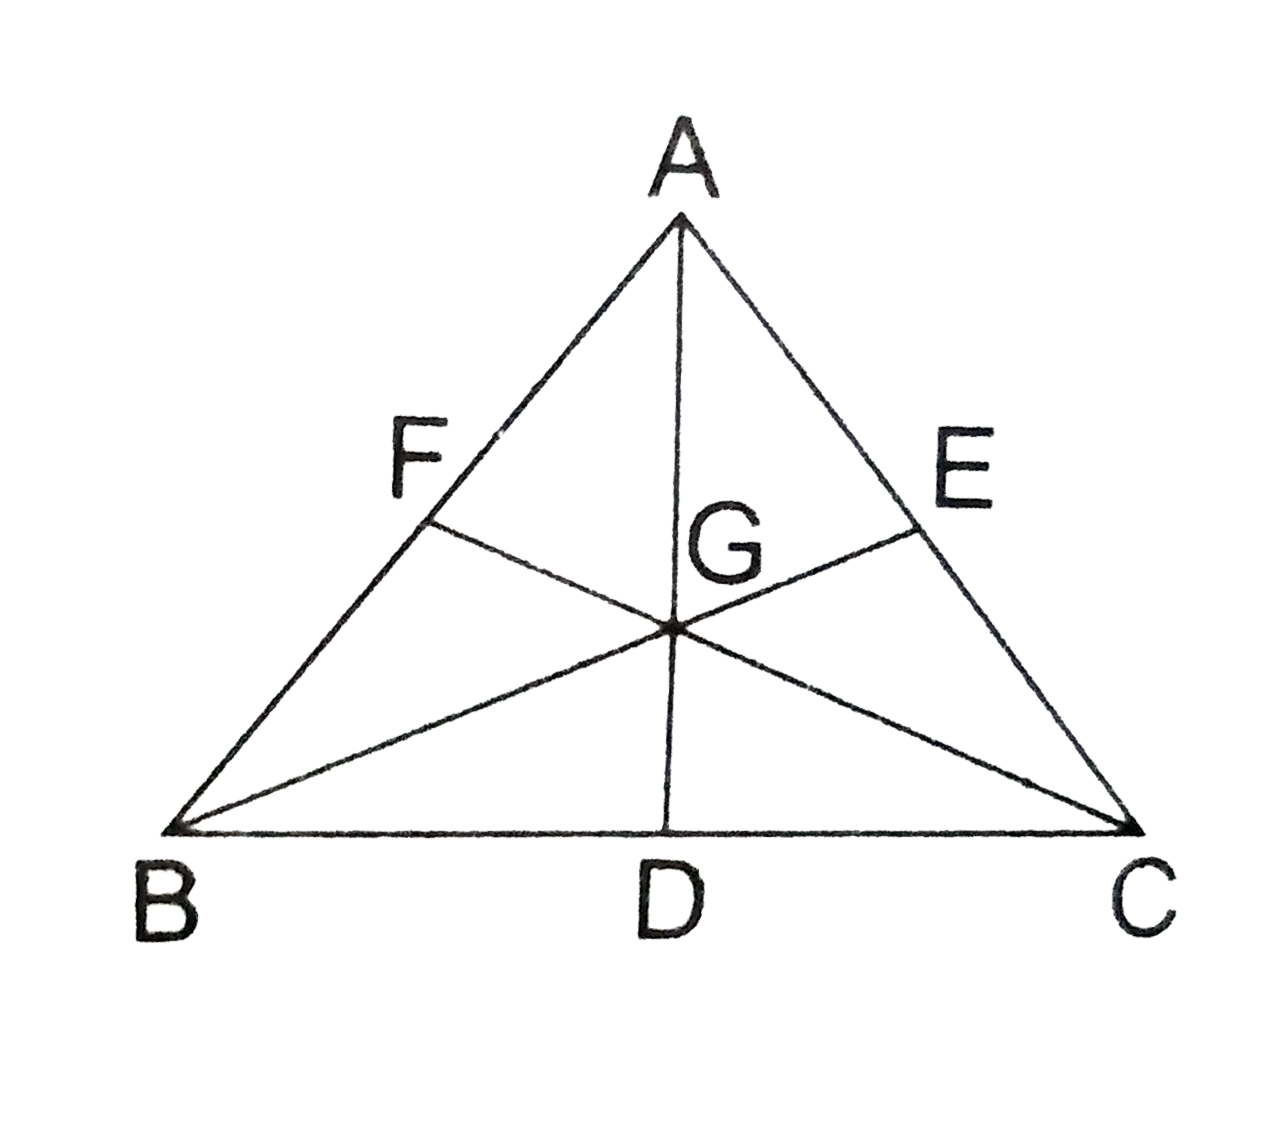 If the medians of a triangleABC intersect at G, show that   ar(triangleAGB)=ar(triangleAGC)=ar(triangleBGC)   =(1)/(3)ar(triangleABC).